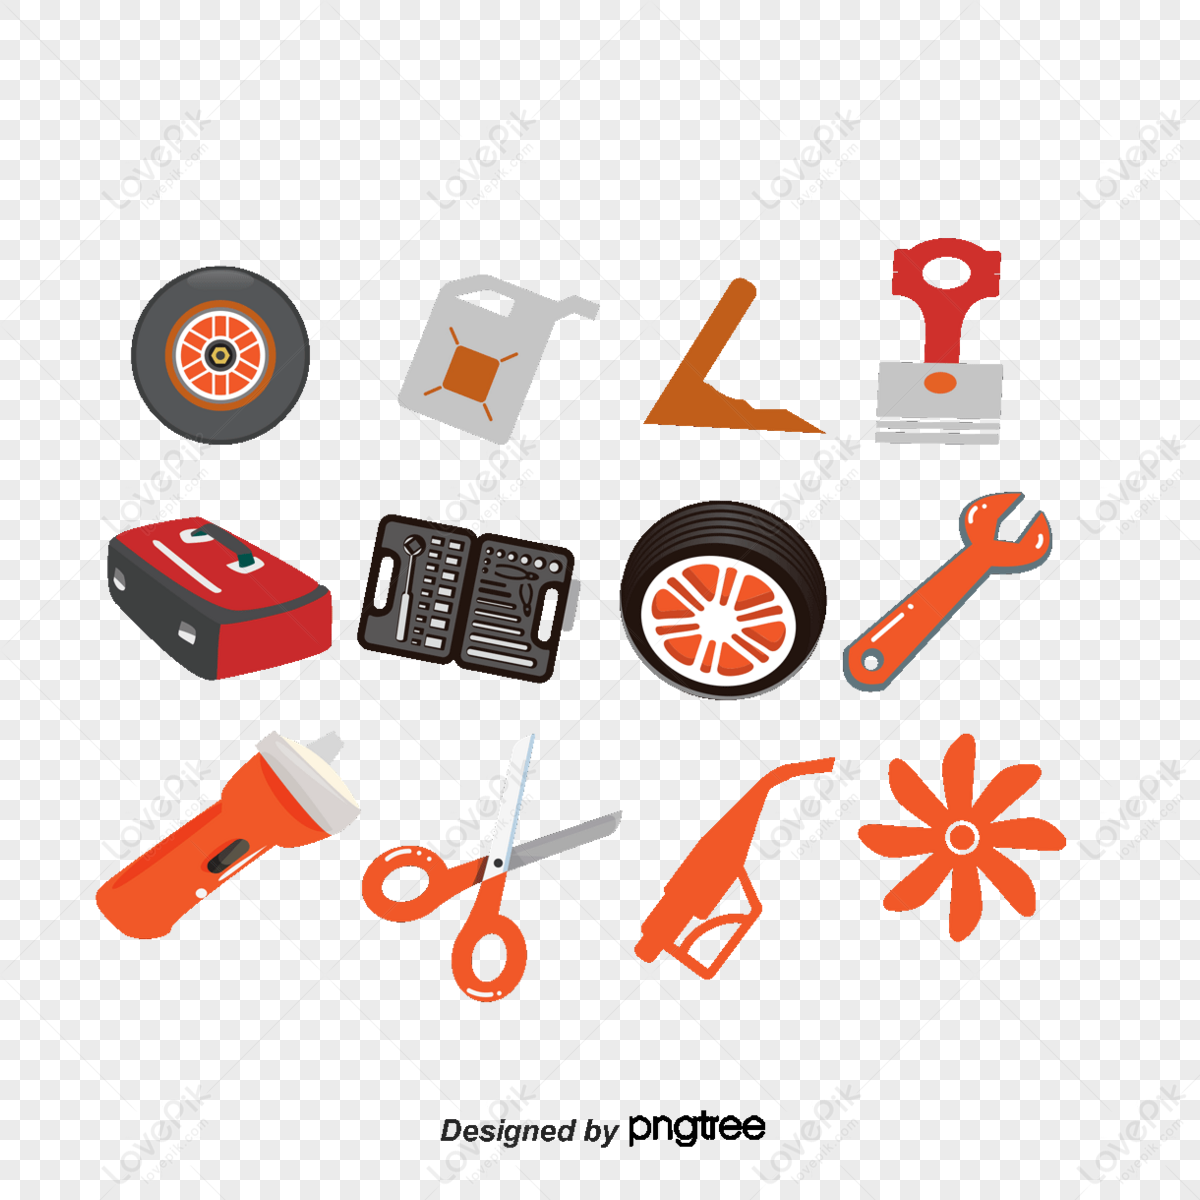 Auto Parts PNG Images With Transparent Background